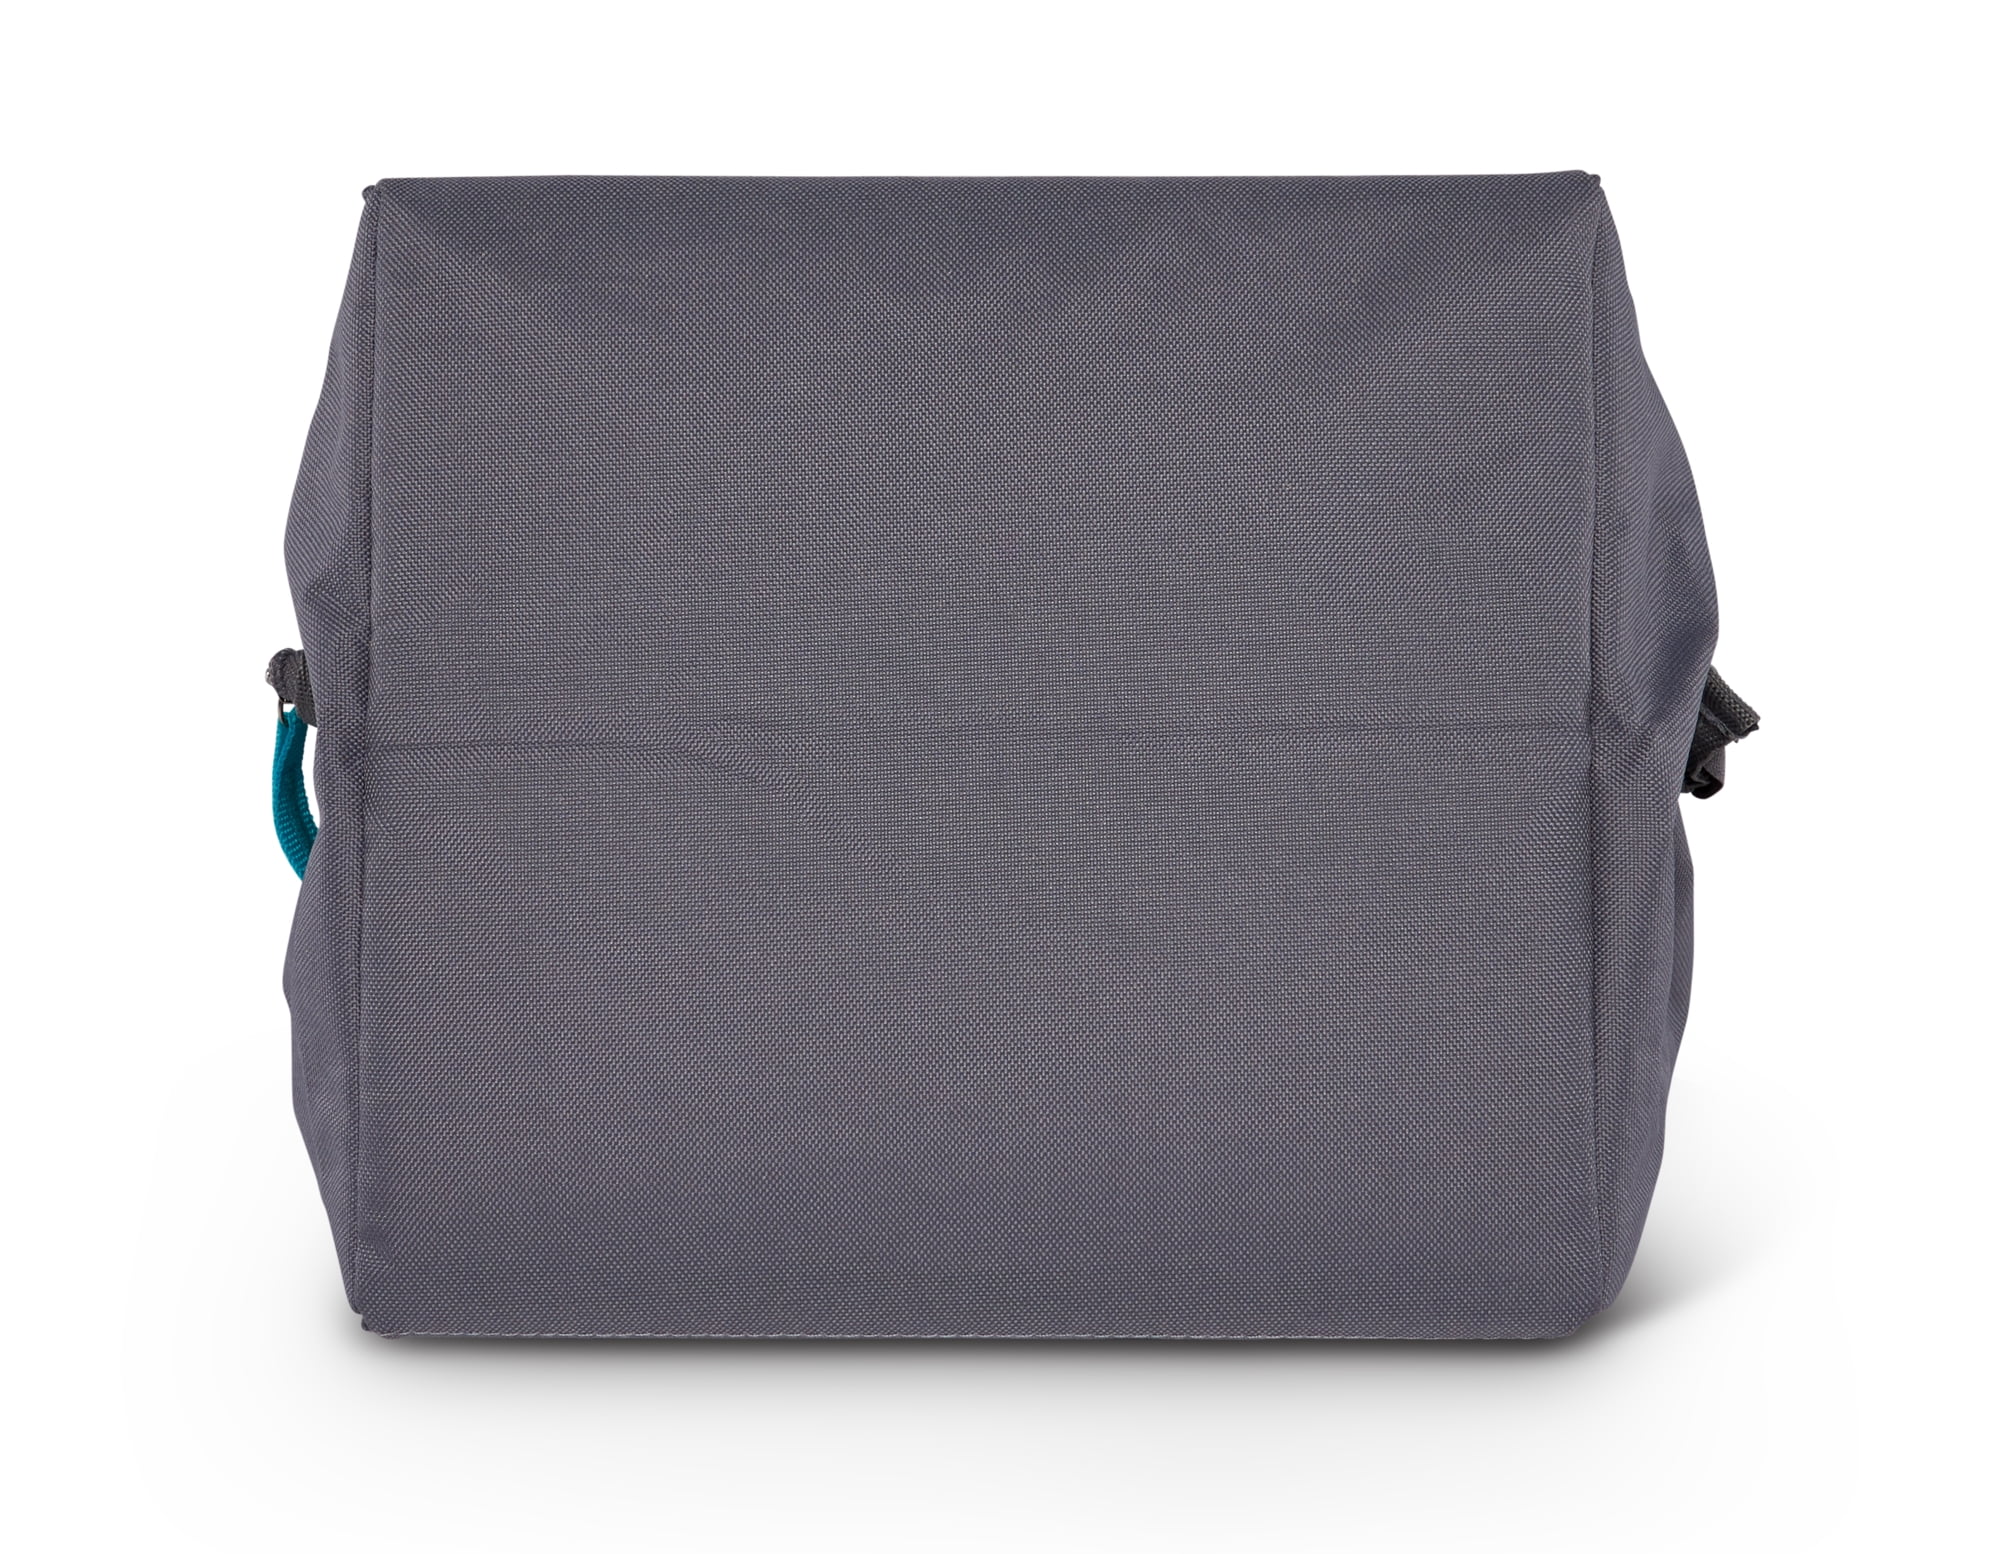 Igloo 9 Can Balance Mini City Cooler Lunch Tote- Gray/Black